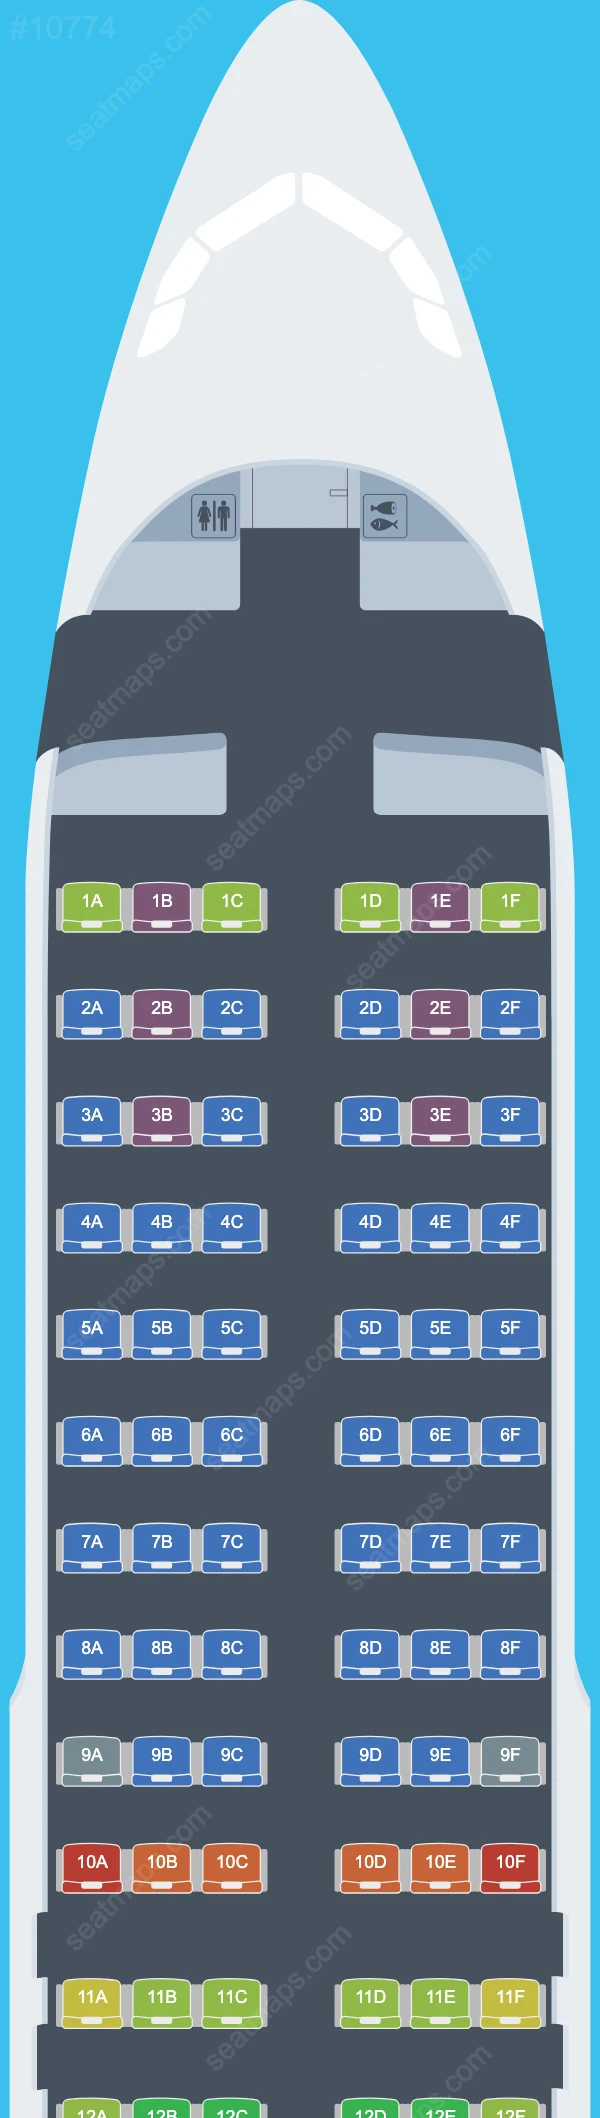 Avianca Airbus A320 Seat Maps A320-200 V.4